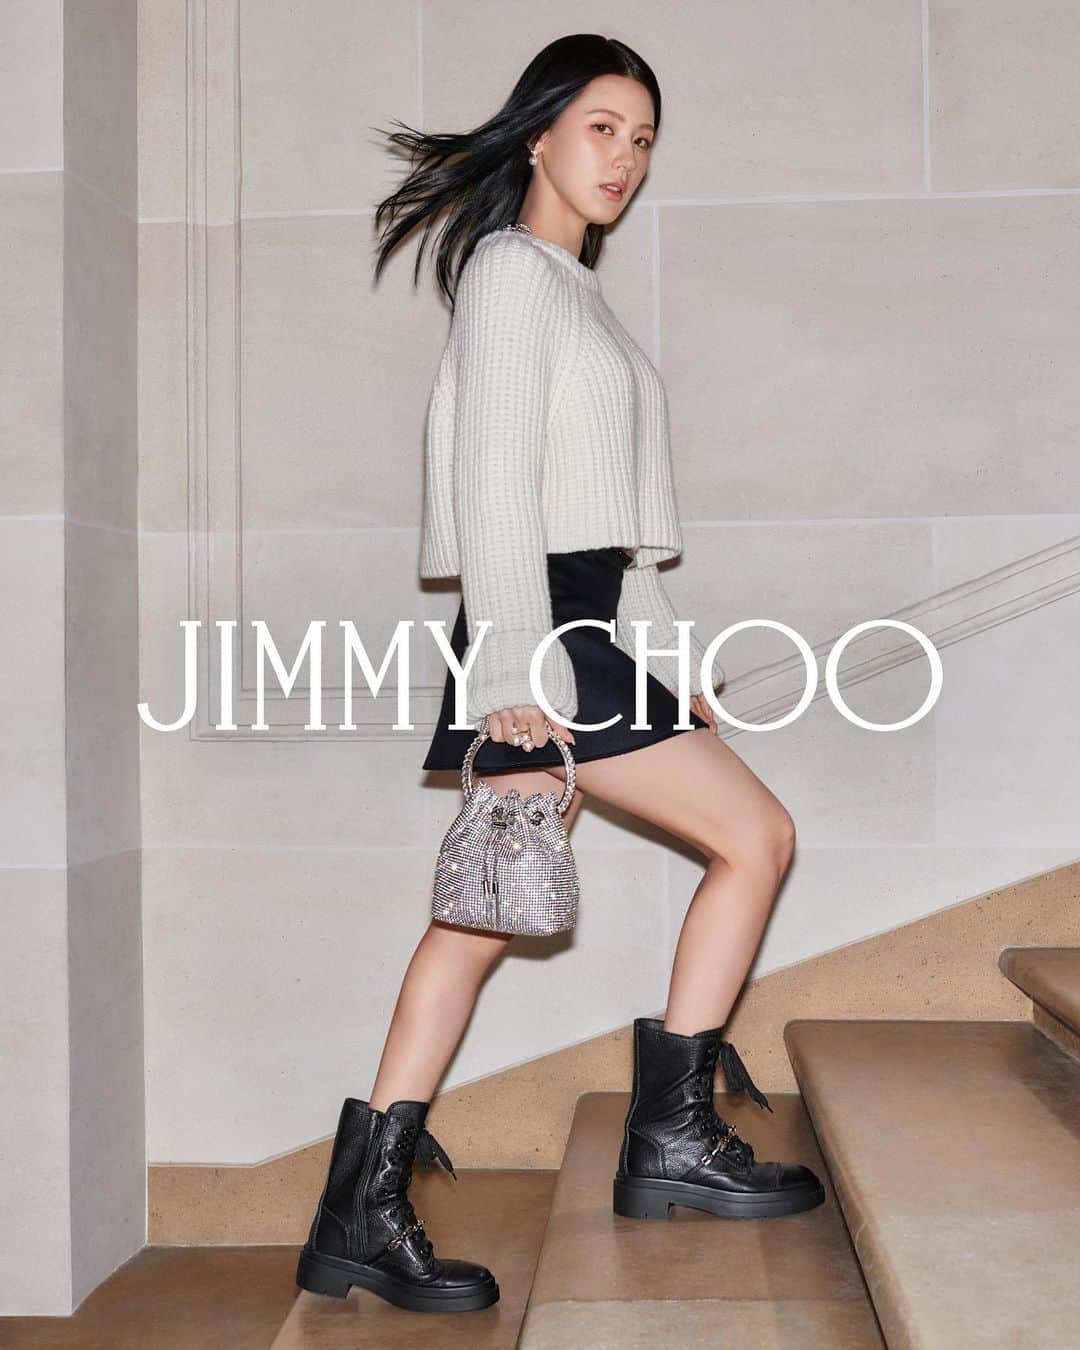 Jimmy Chooのインスタグラム：「Take your style cues from Global Brand Ambassador @noodle.zip and double down on statement shoes and accessories - the iconic Crystal Bon Bon and Nari combat boots make for a playful mix. #JimmyChoo」